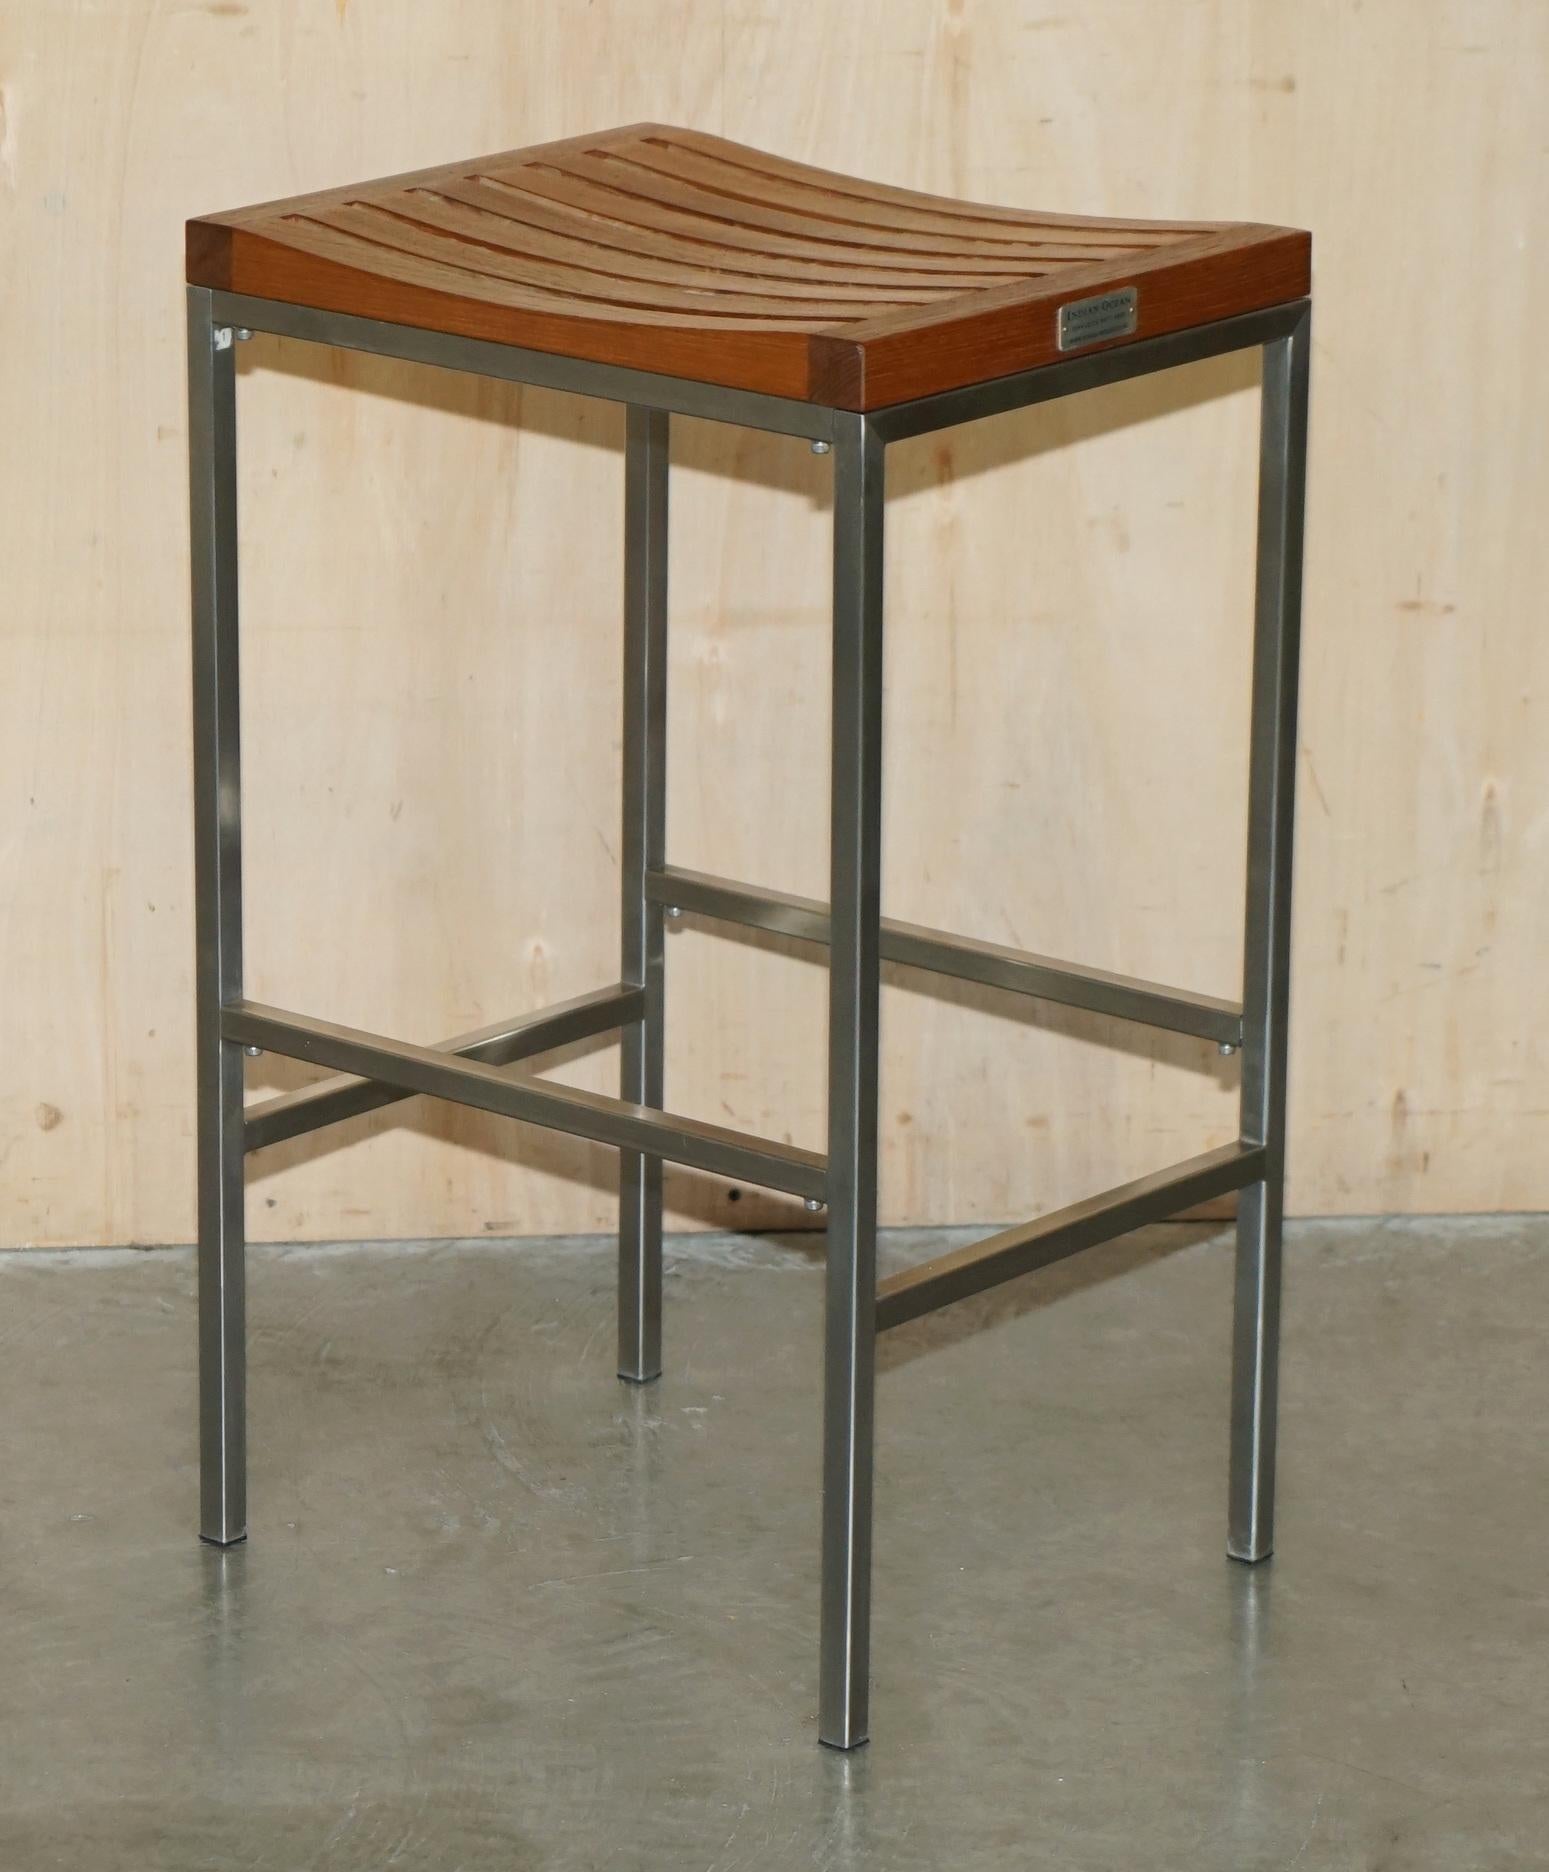 FINE SUiTE OF FOUR INDIAN OCEAN METAL AND SLATTED WOOD BAR OR KITCHEN STOOLS For Sale 9